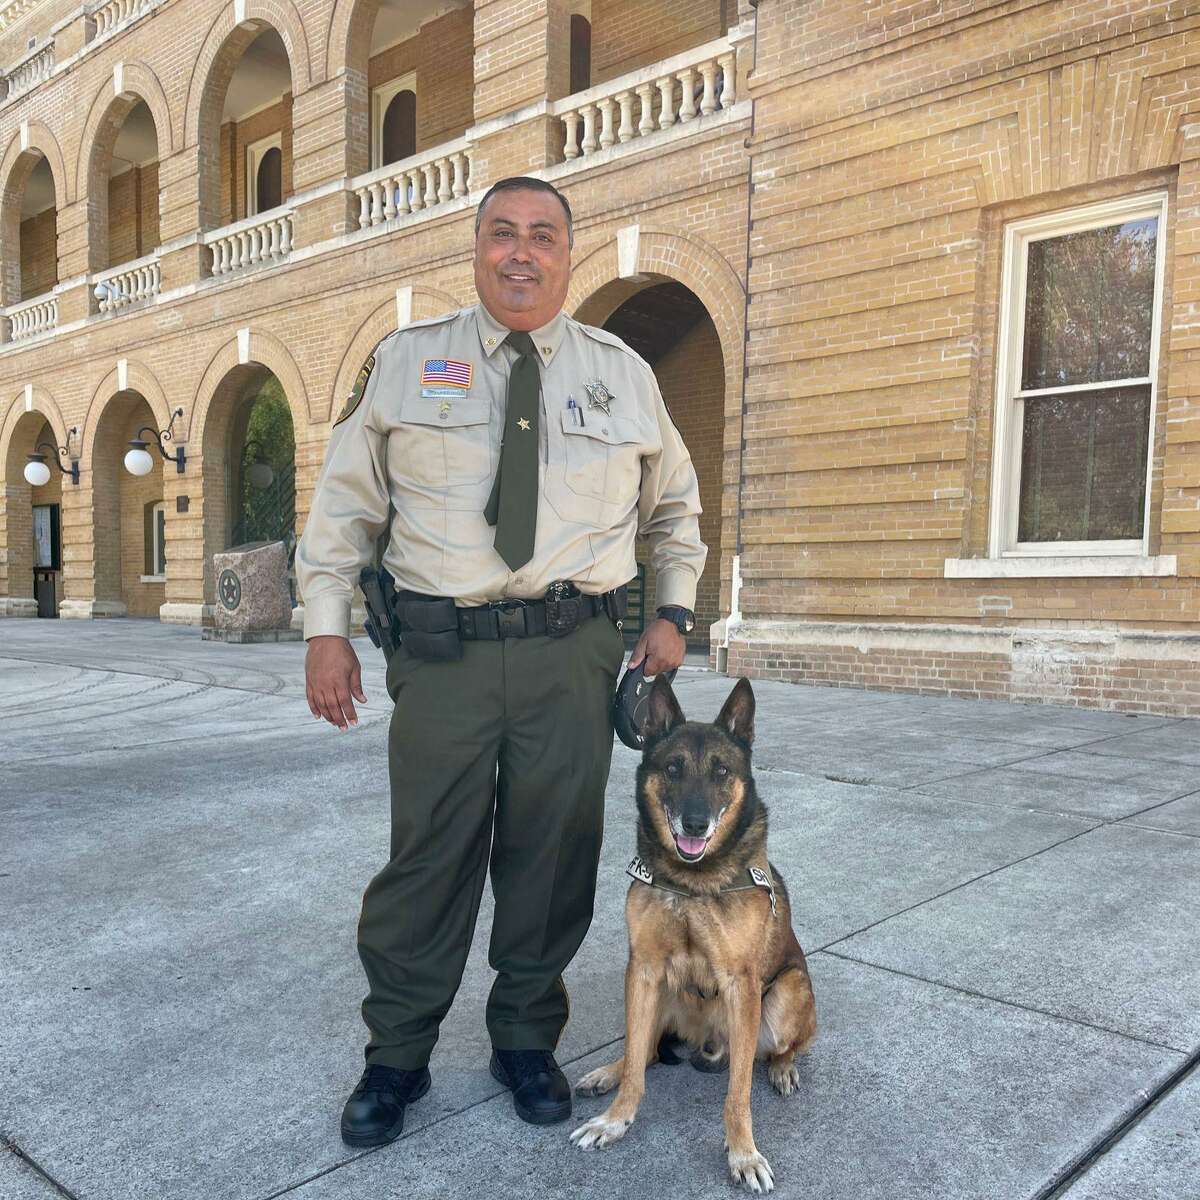 Deputy Luis Agredano and Brix were part of the Laredo K-9 team at the National Narcotic Detector Dog Association Competition where Brix obtained 1st place out of 87 agents.